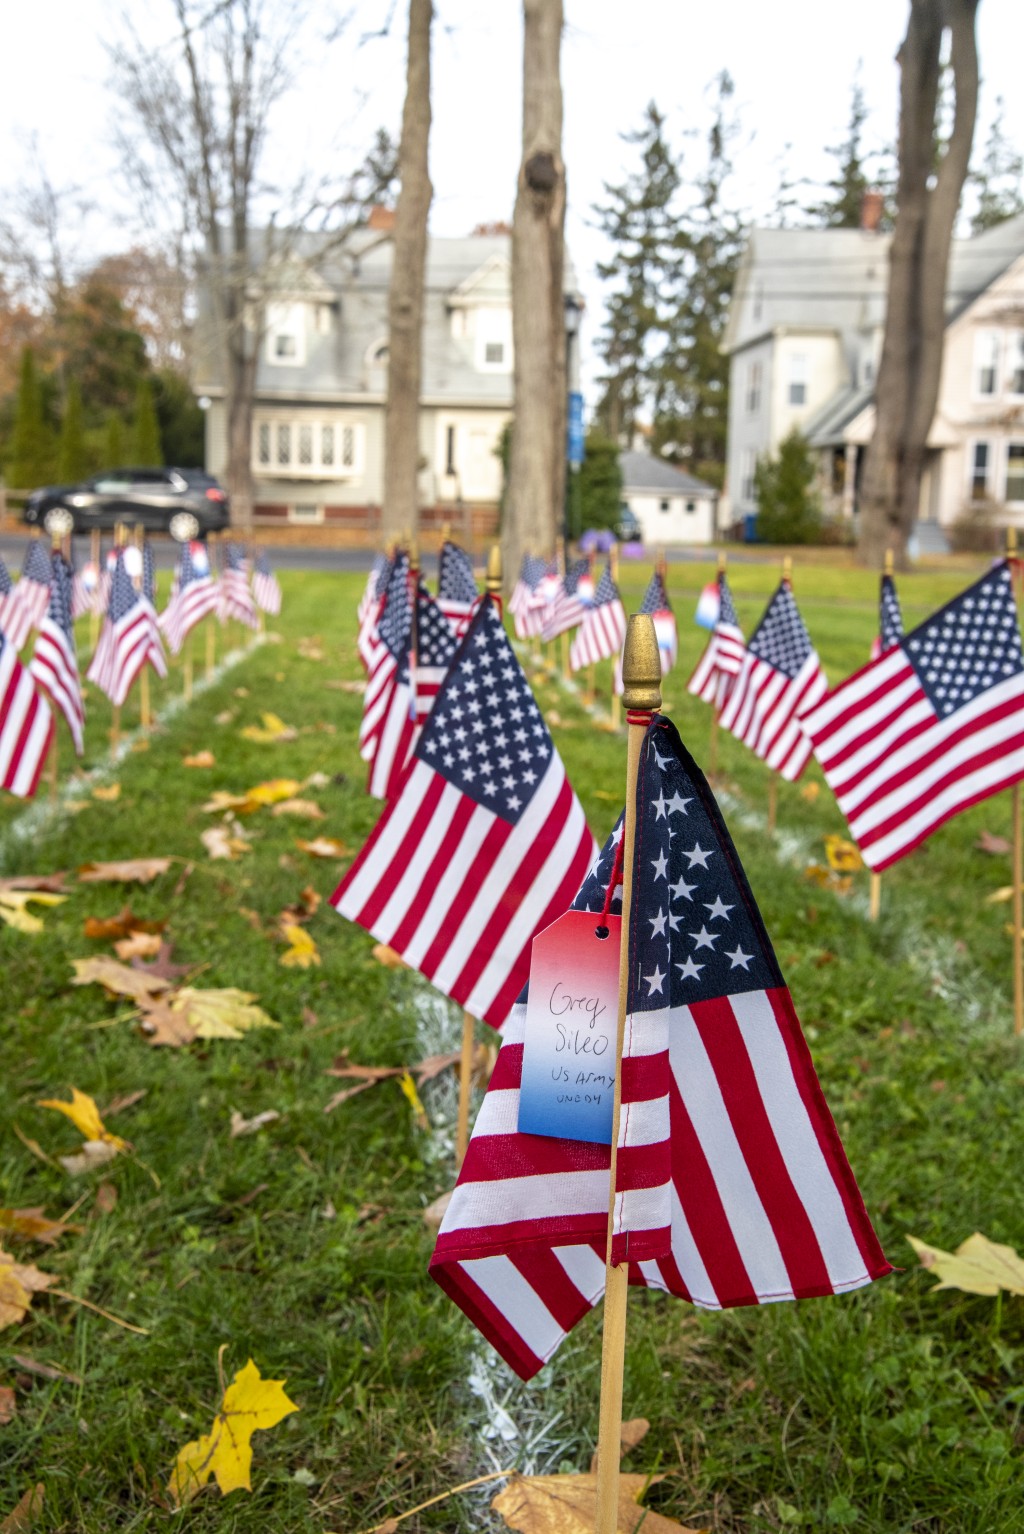 Small American flags are planted in rows on UNE's campus green in Portland in honors of Veterans Day